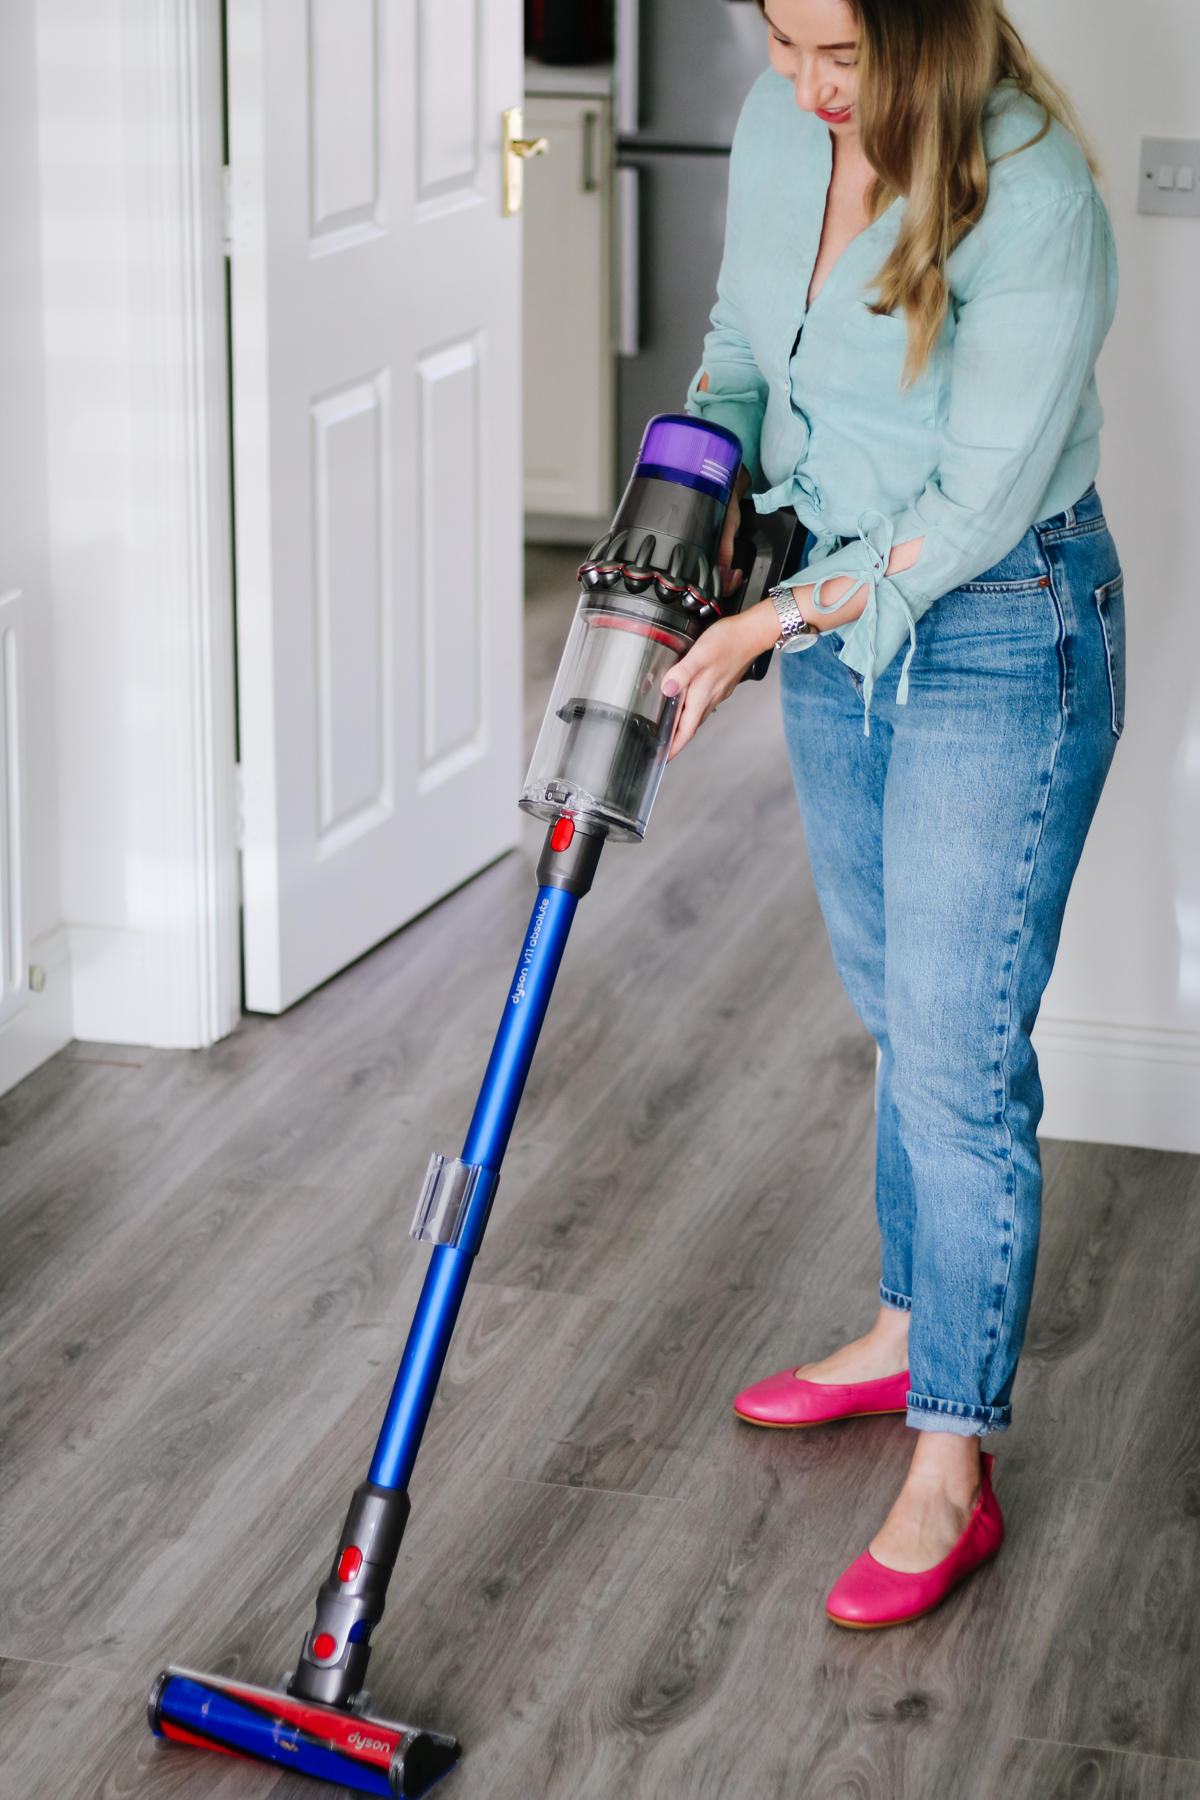 Dyson V11 Absolute Vacuum Review 